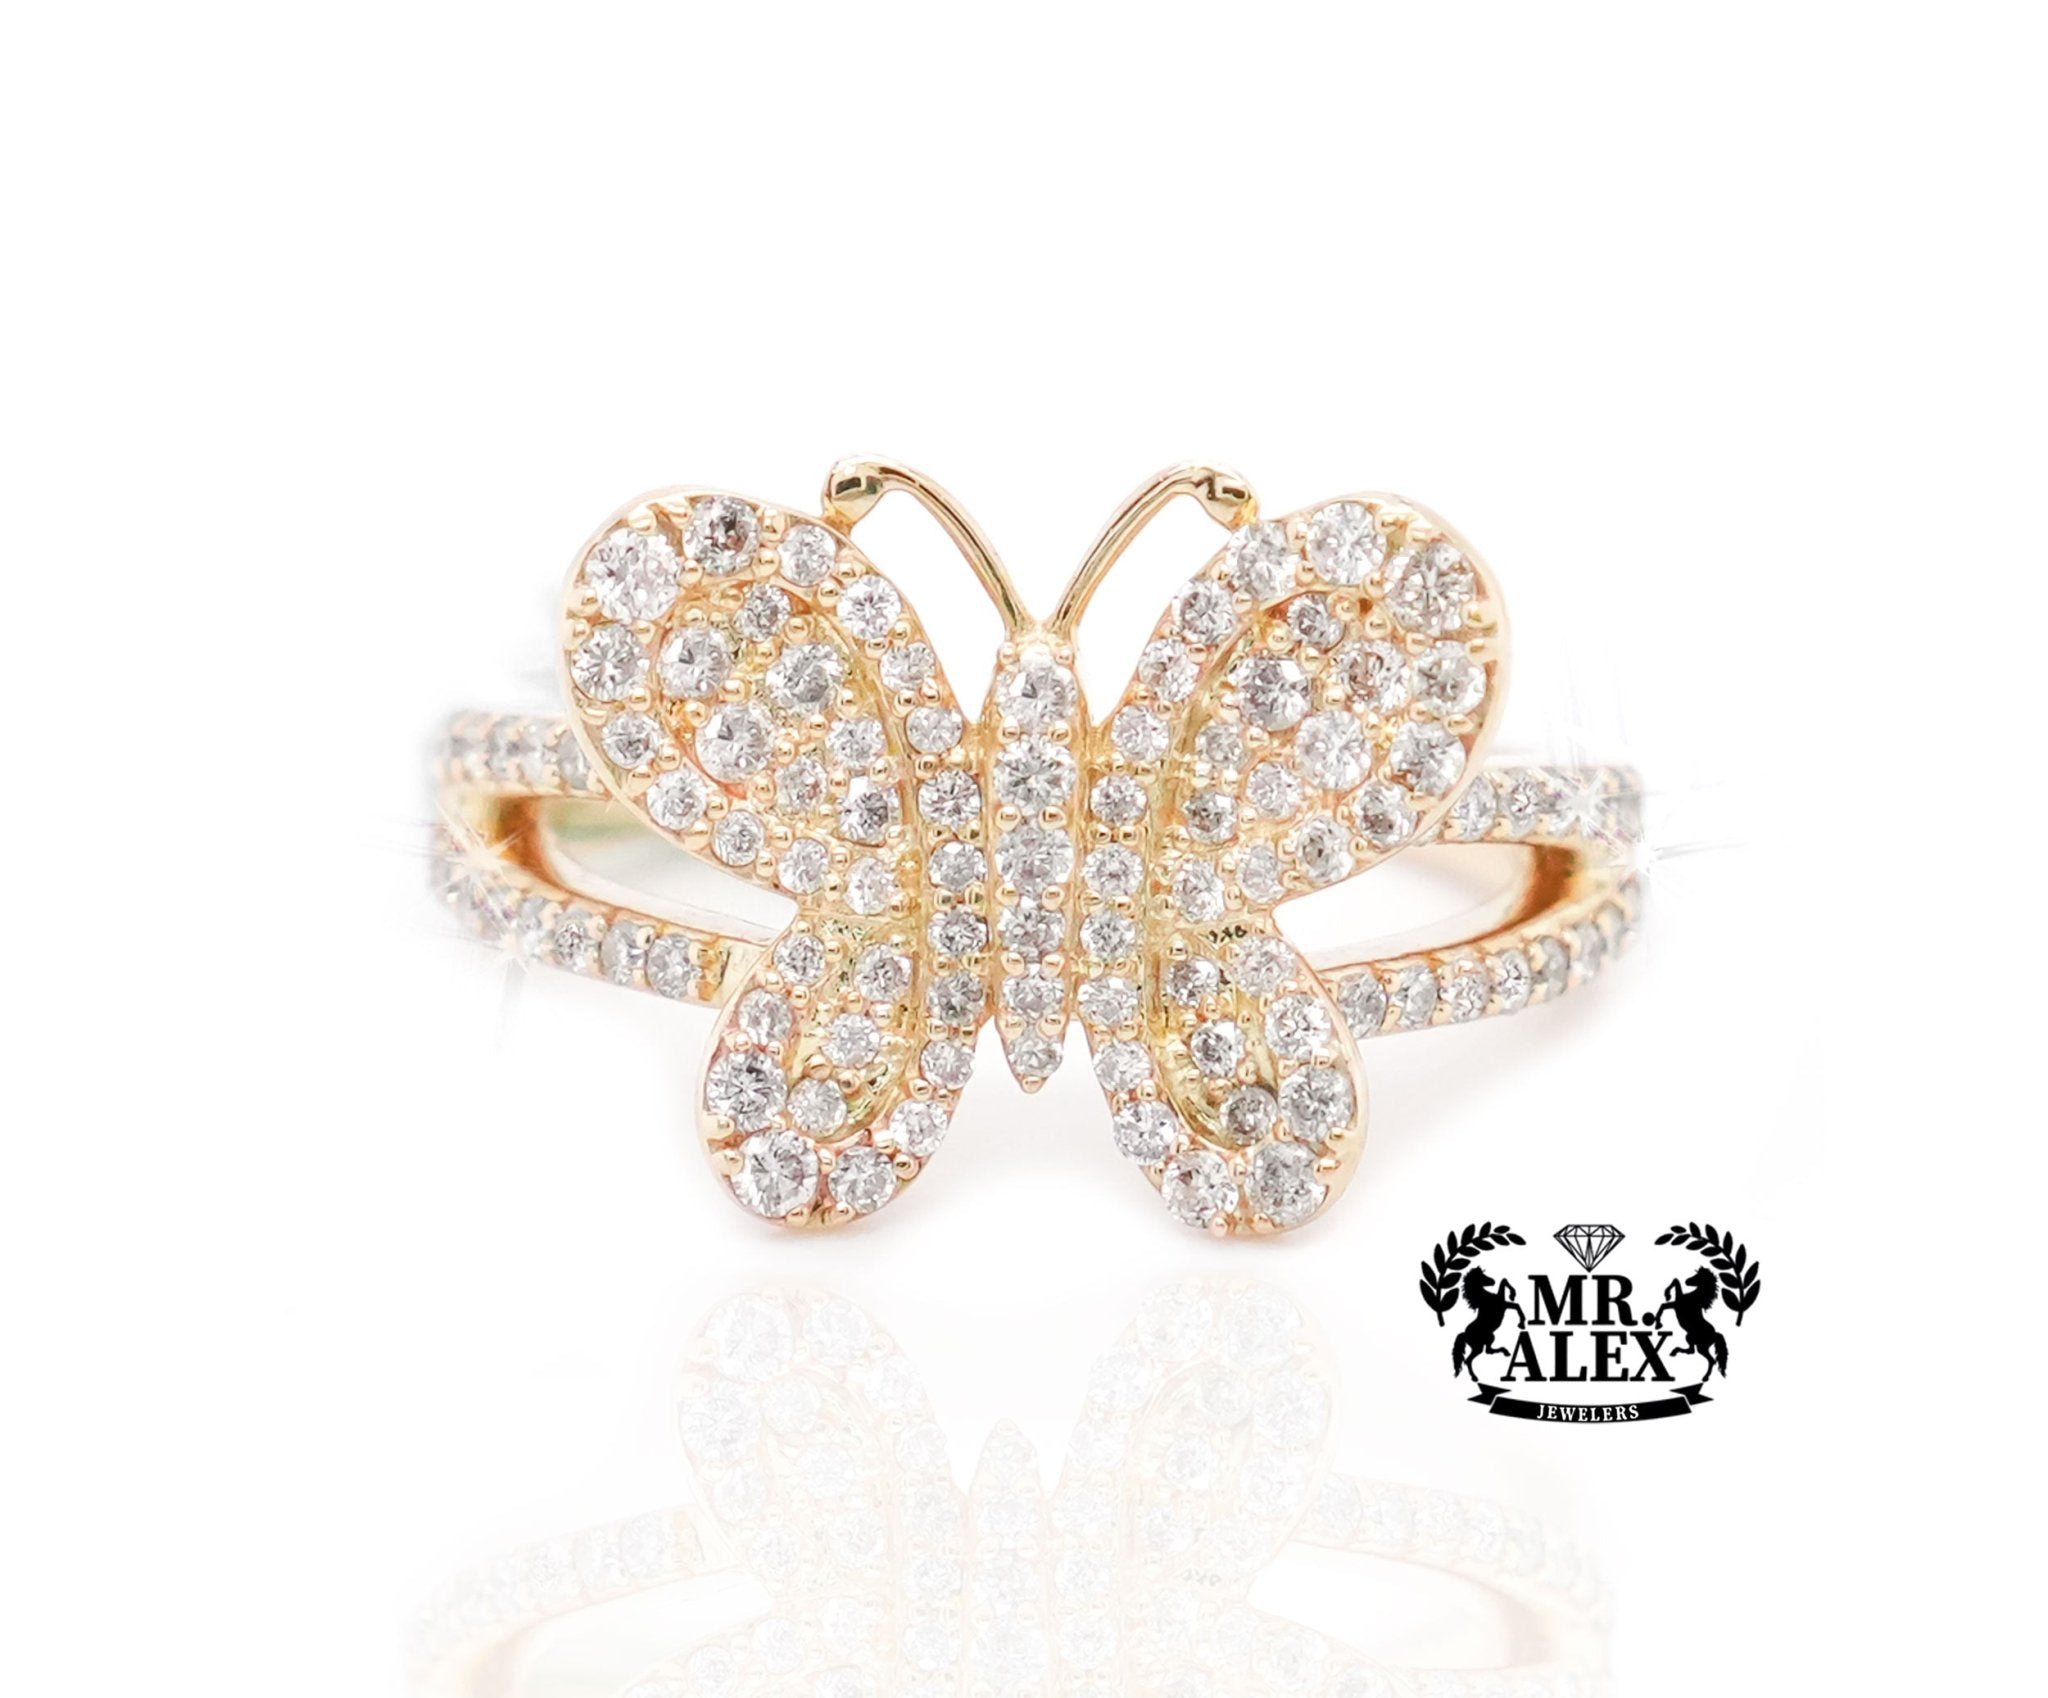 10K Gold Butterfly Ring with Diamond Accents 0.80ct - Mr. Alex Jewelry